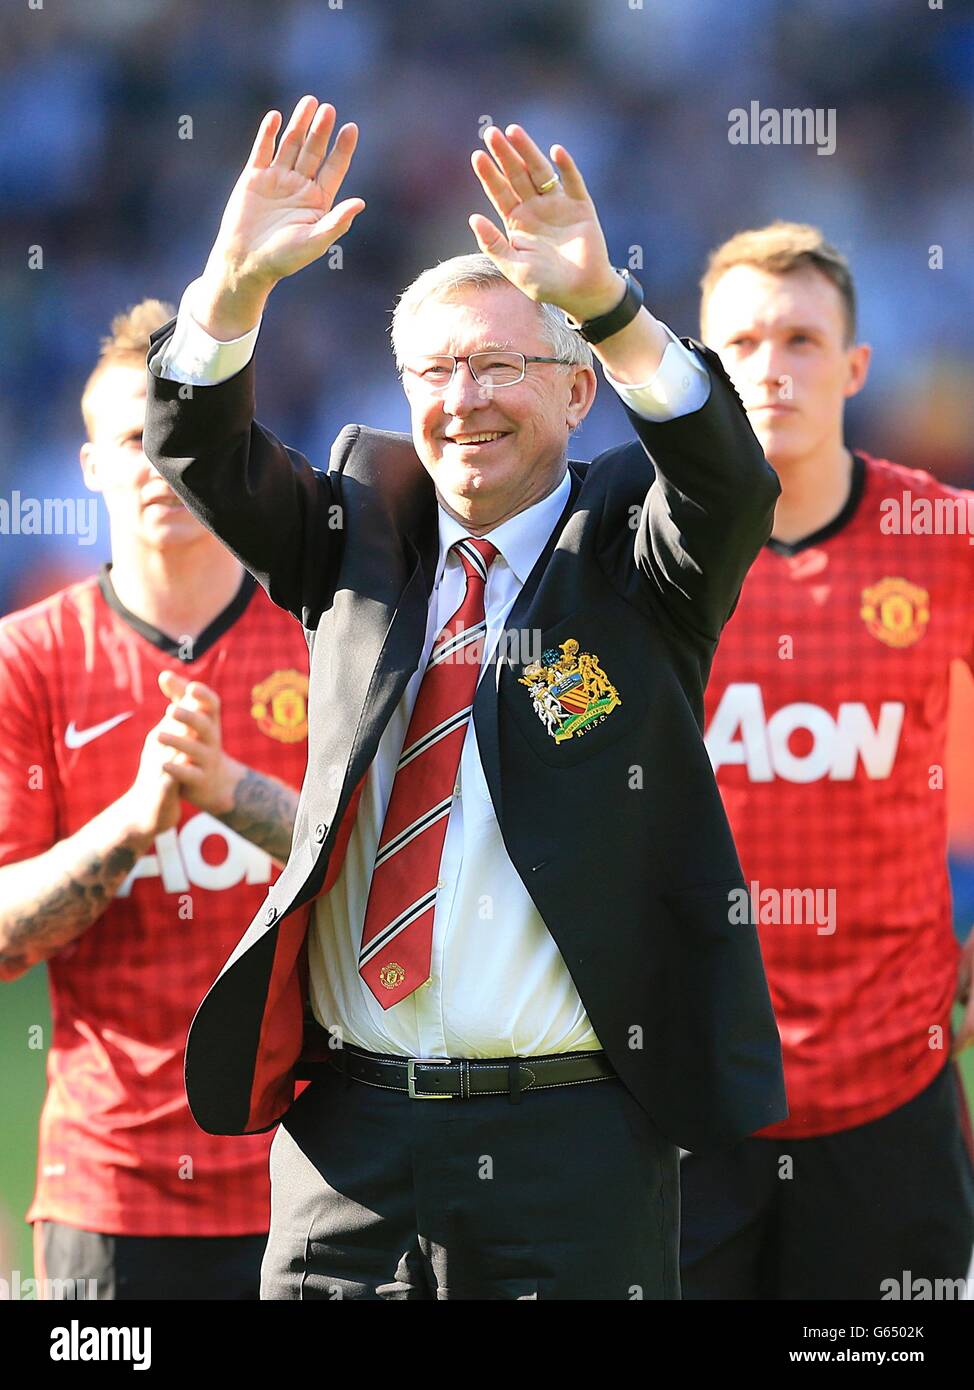 Soccer - Barclays Premier League - West Bromwich Albion v Manchester United - The Hawthorns. Manchester United manager Sir Alex Ferguson acknowledges the fans after his final game in charge of the club Stock Photo